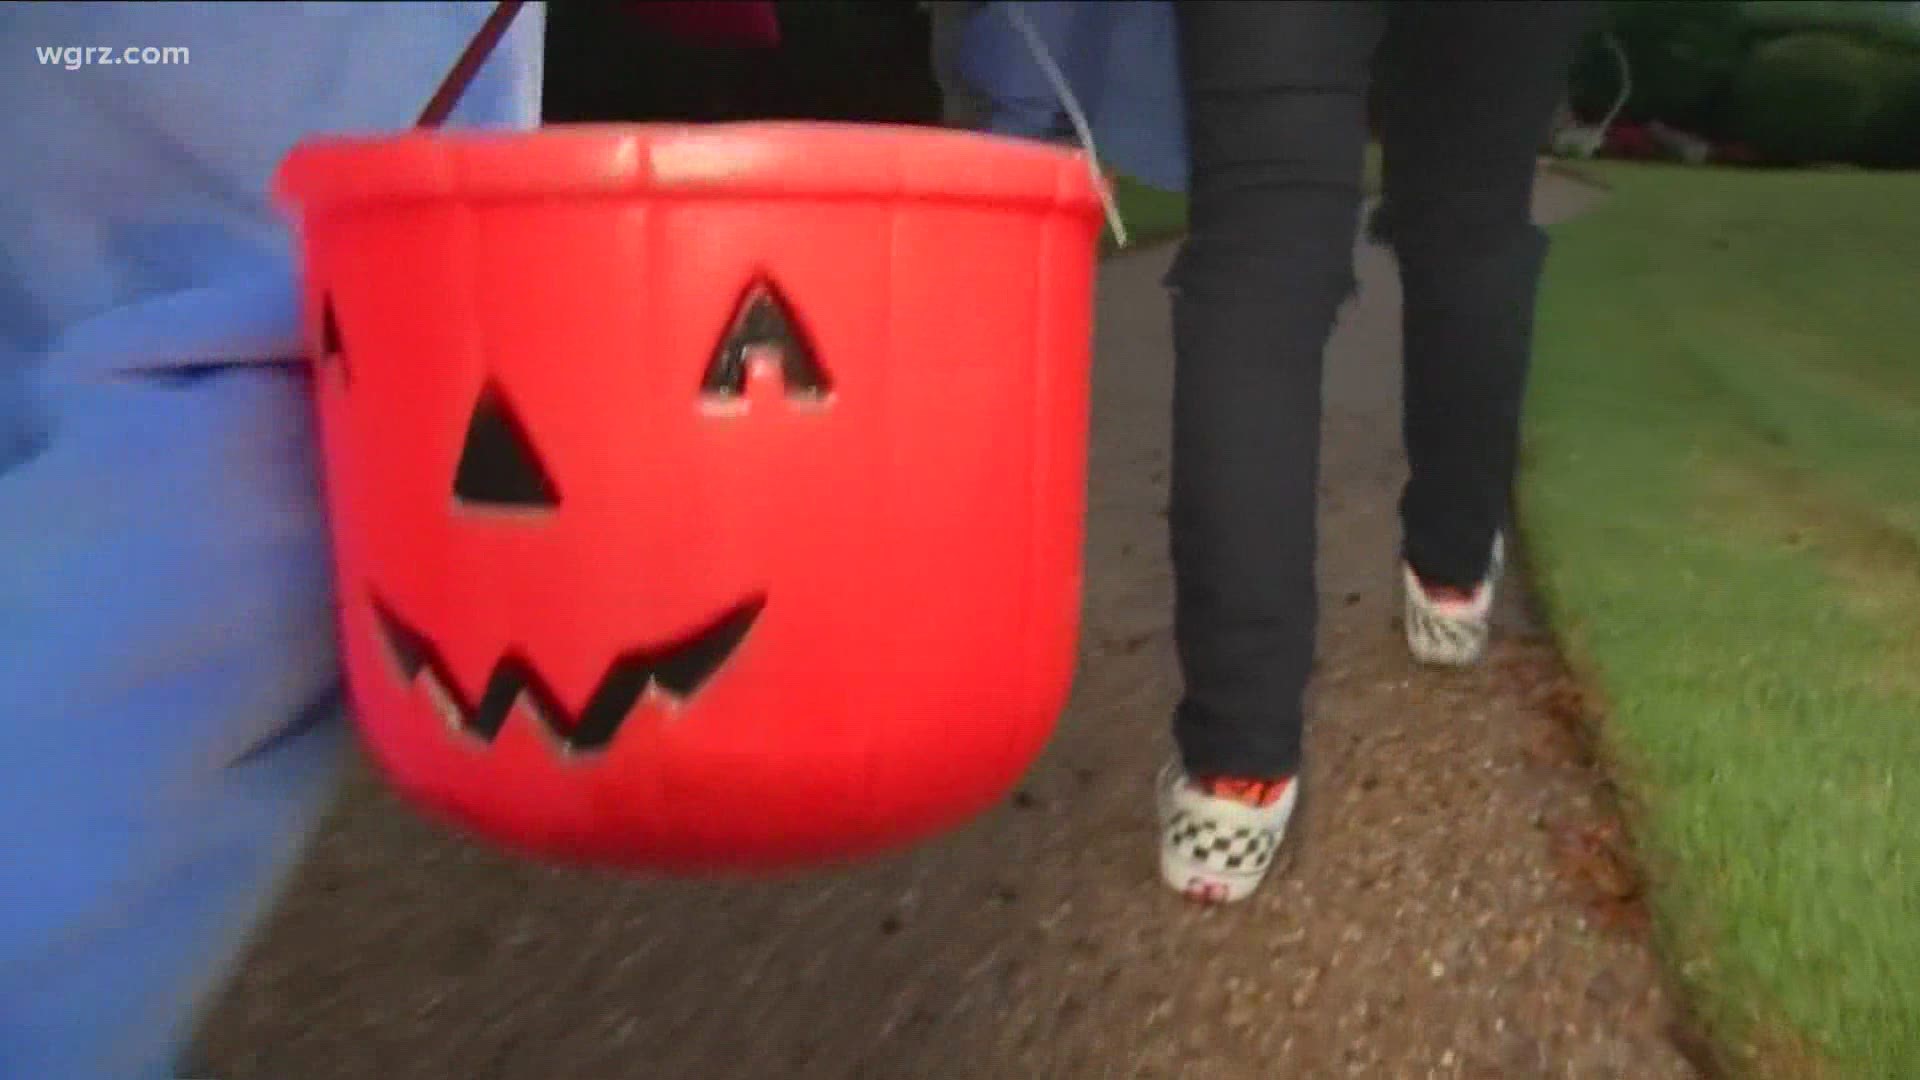 Town of Amherst discouraging trickortreating